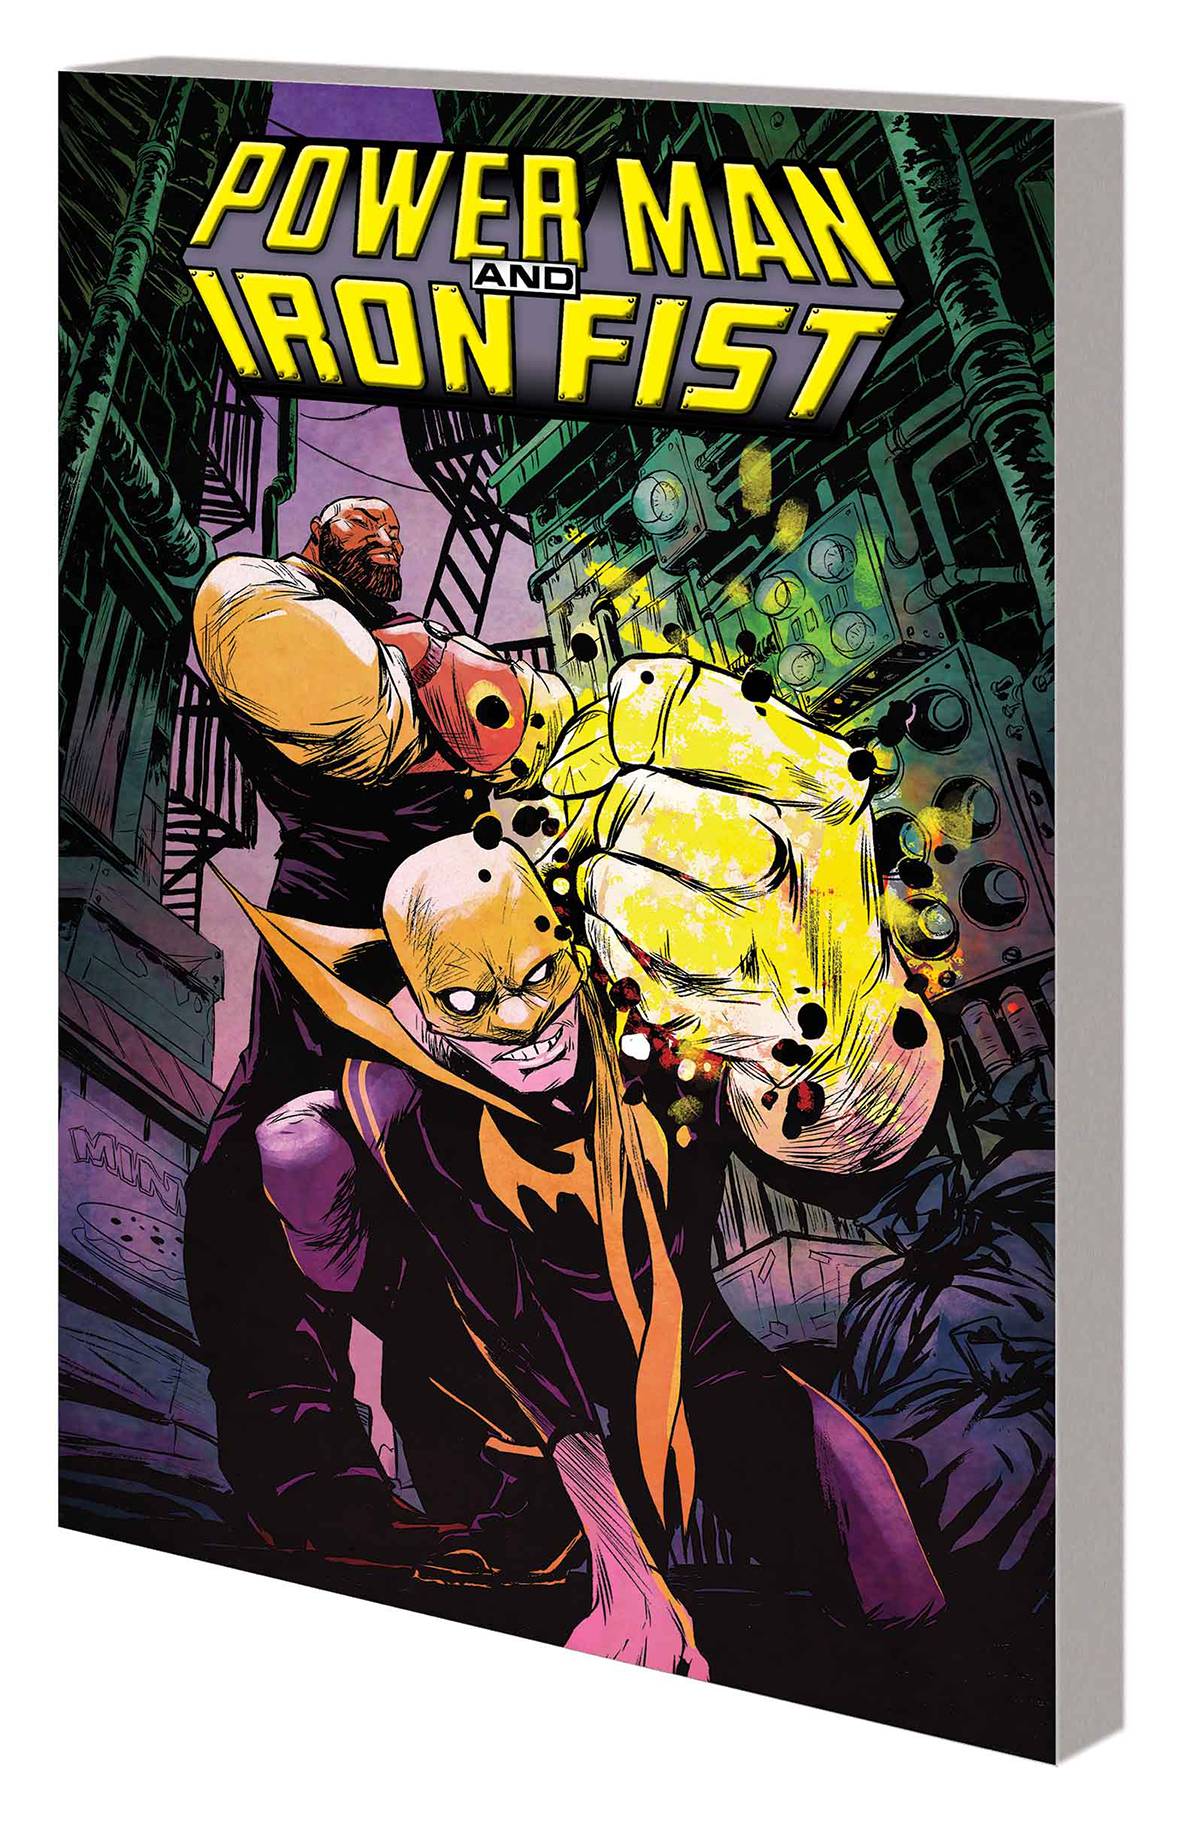 POWER MAN AND IRON FIST TP VOL 01 BOYS ARE BACK IN TOWN